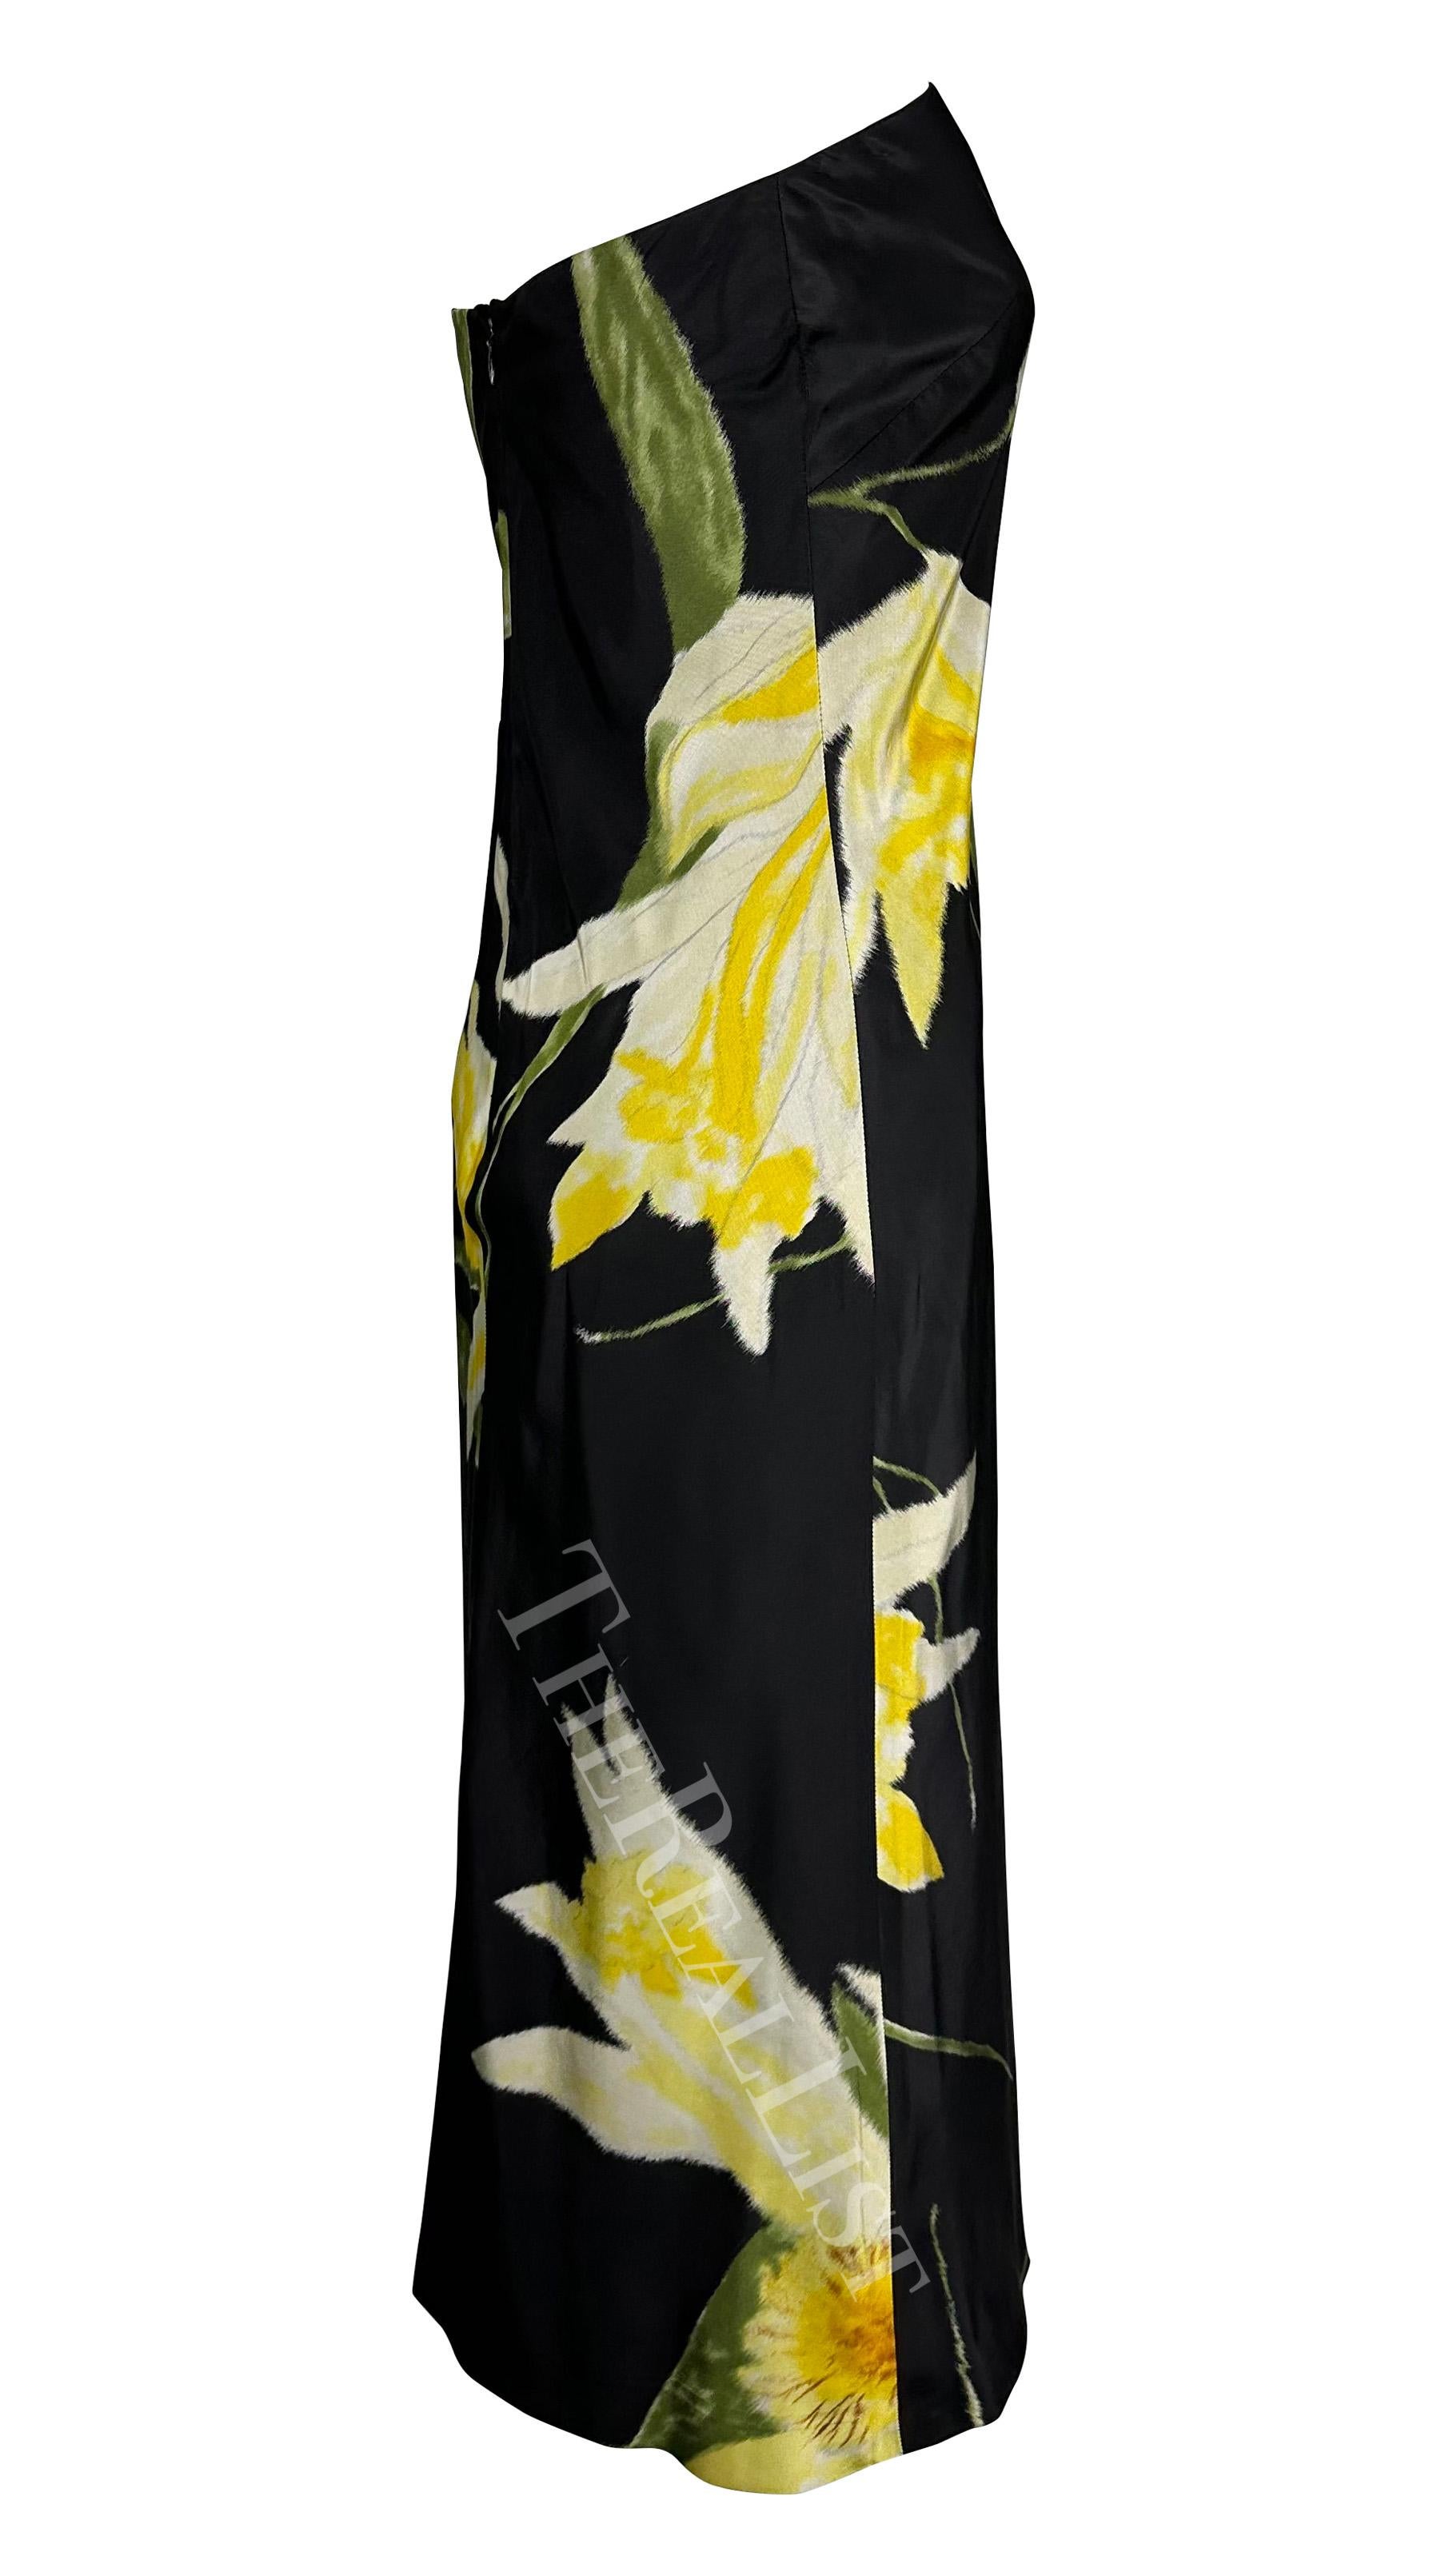 S/S 2000 Ralph Lauren Runway Black Yellow Floral Strapless Cocktail Dress For Sale 5